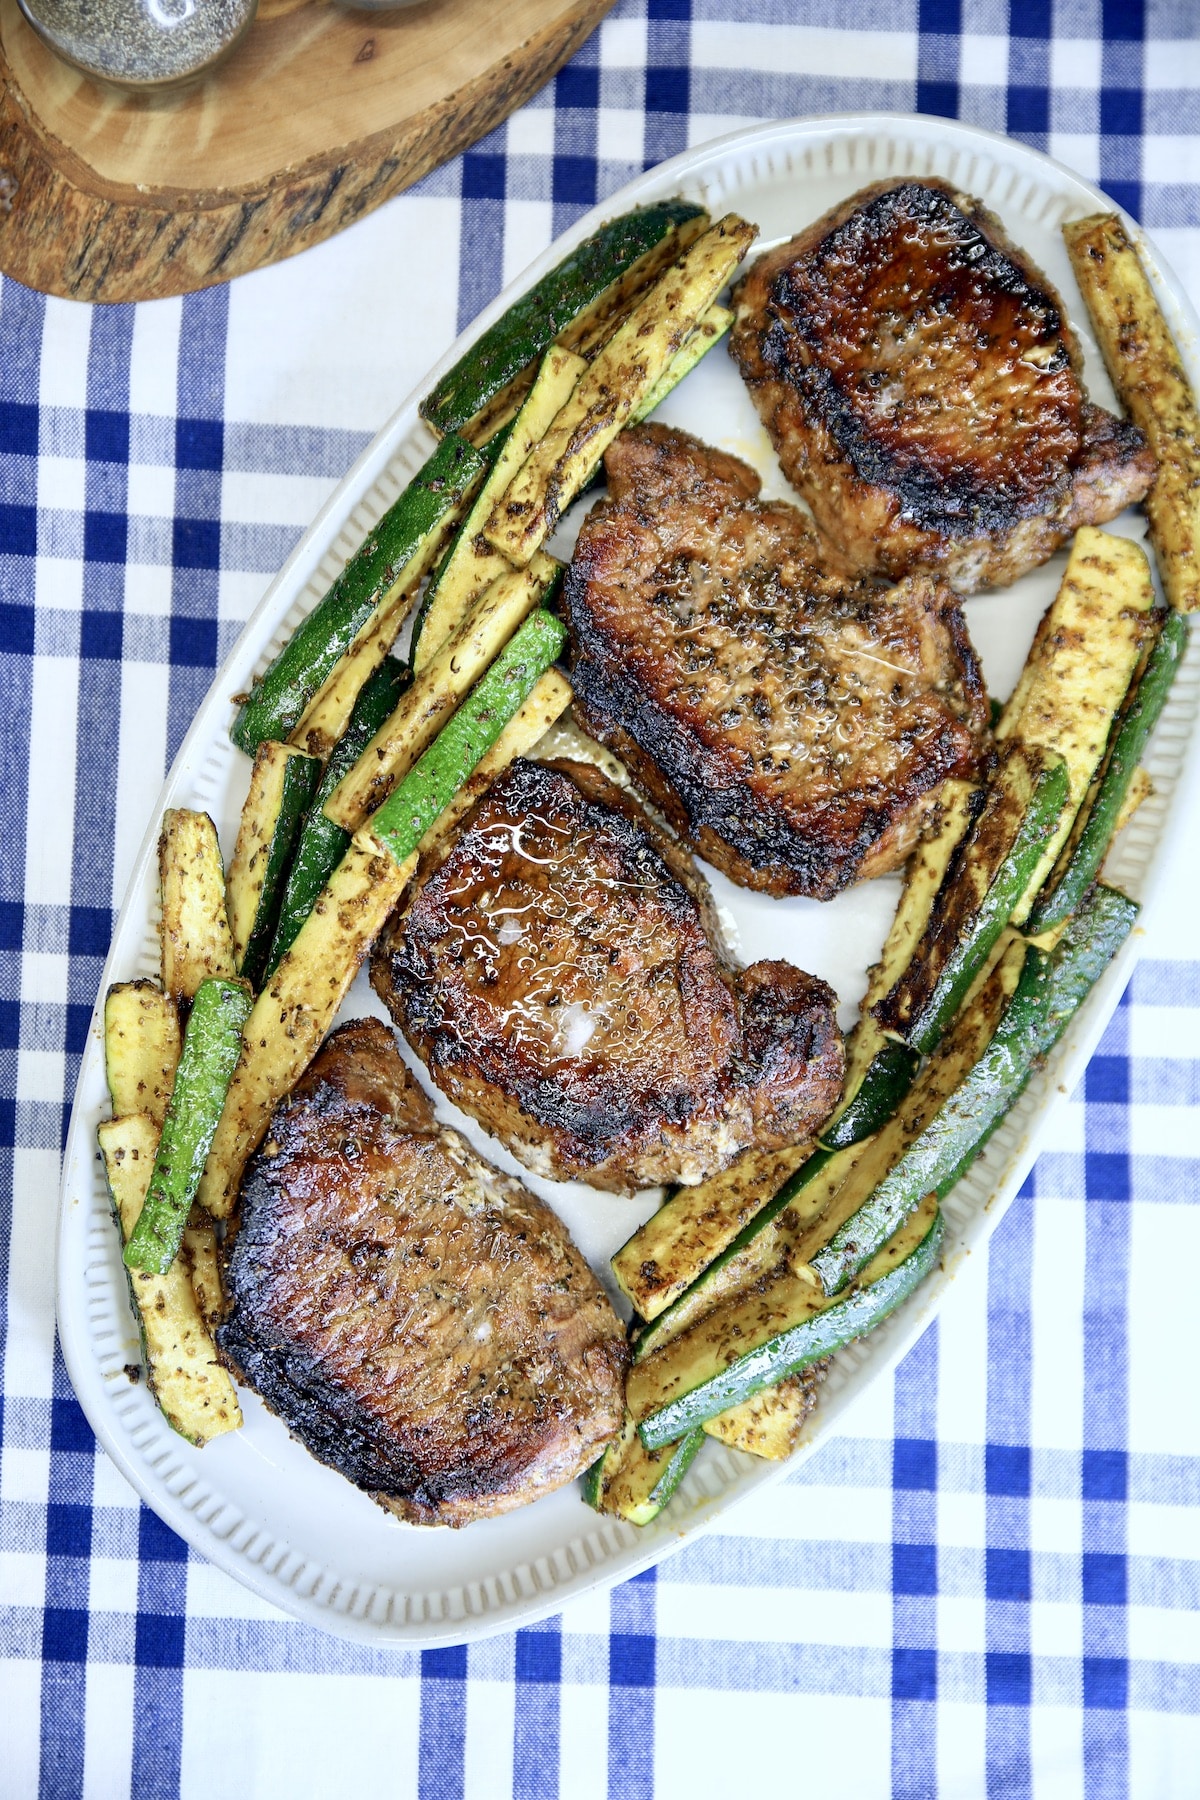 Grilled pork chops on a platter with zucchini on a blue and white plaid cloth.